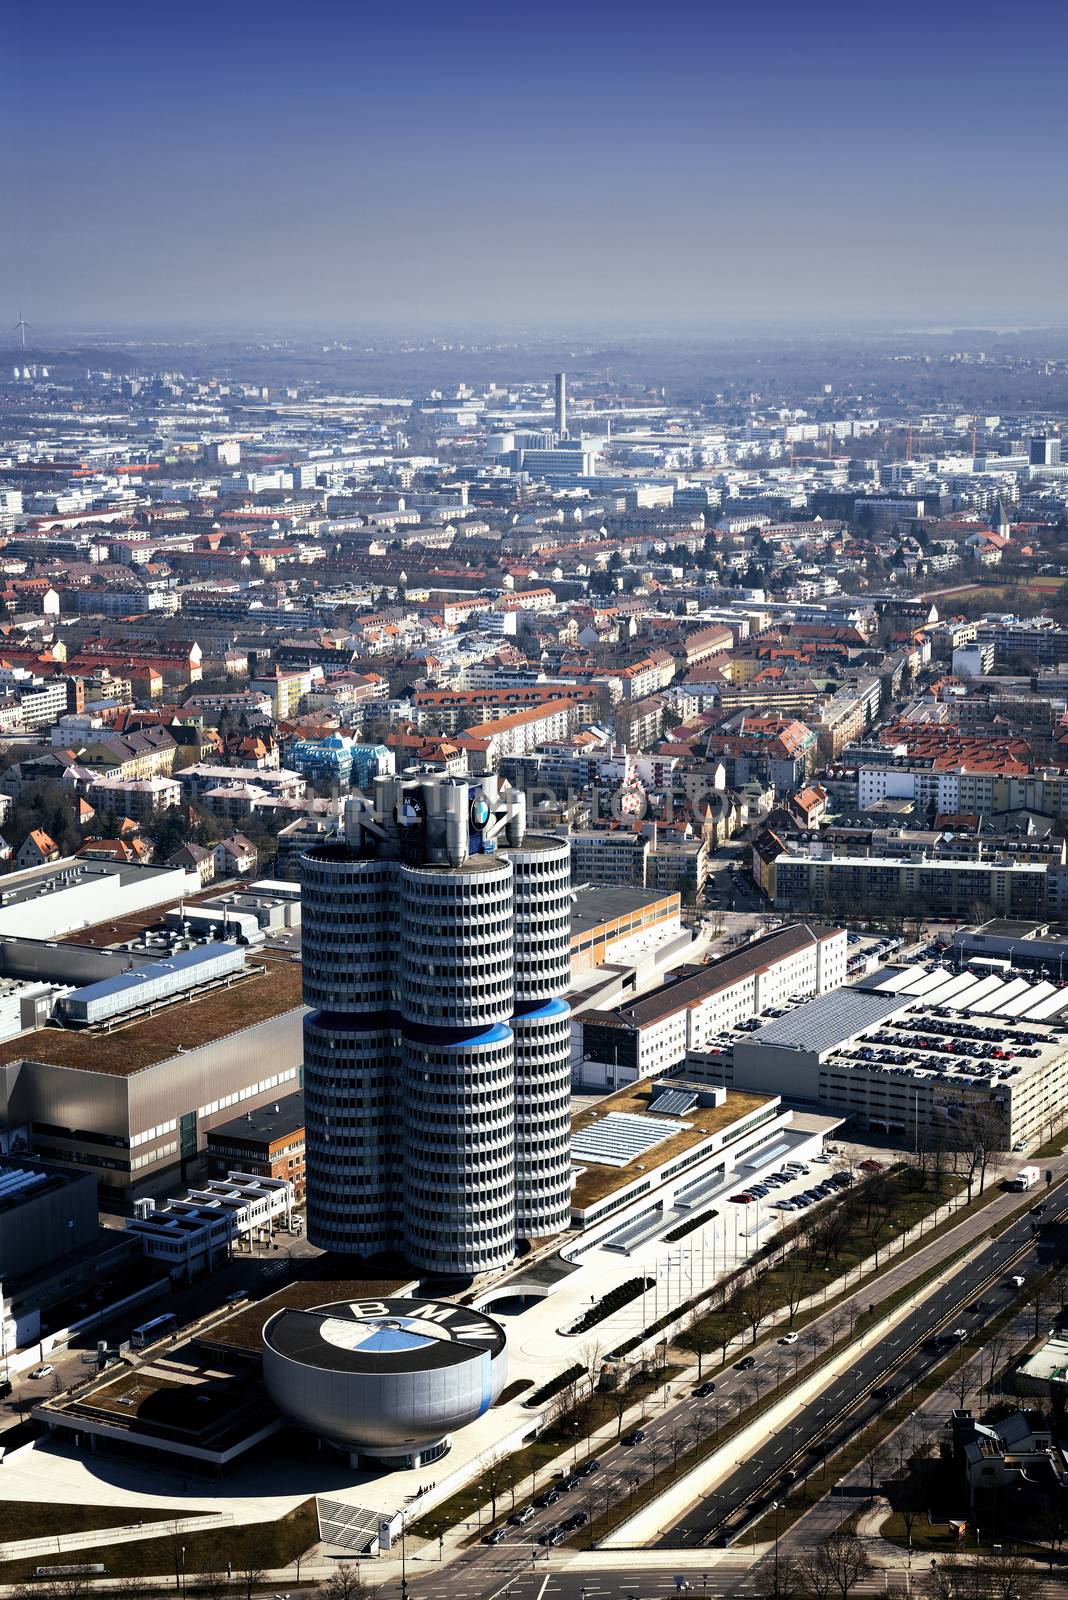 MUNICH, GERMANY - JANUARY 5: BMW Headquarters on March 10, 2015. The four vertical cylinders building is a Munich landmark which is world headquarters for the Bavarian automaker.